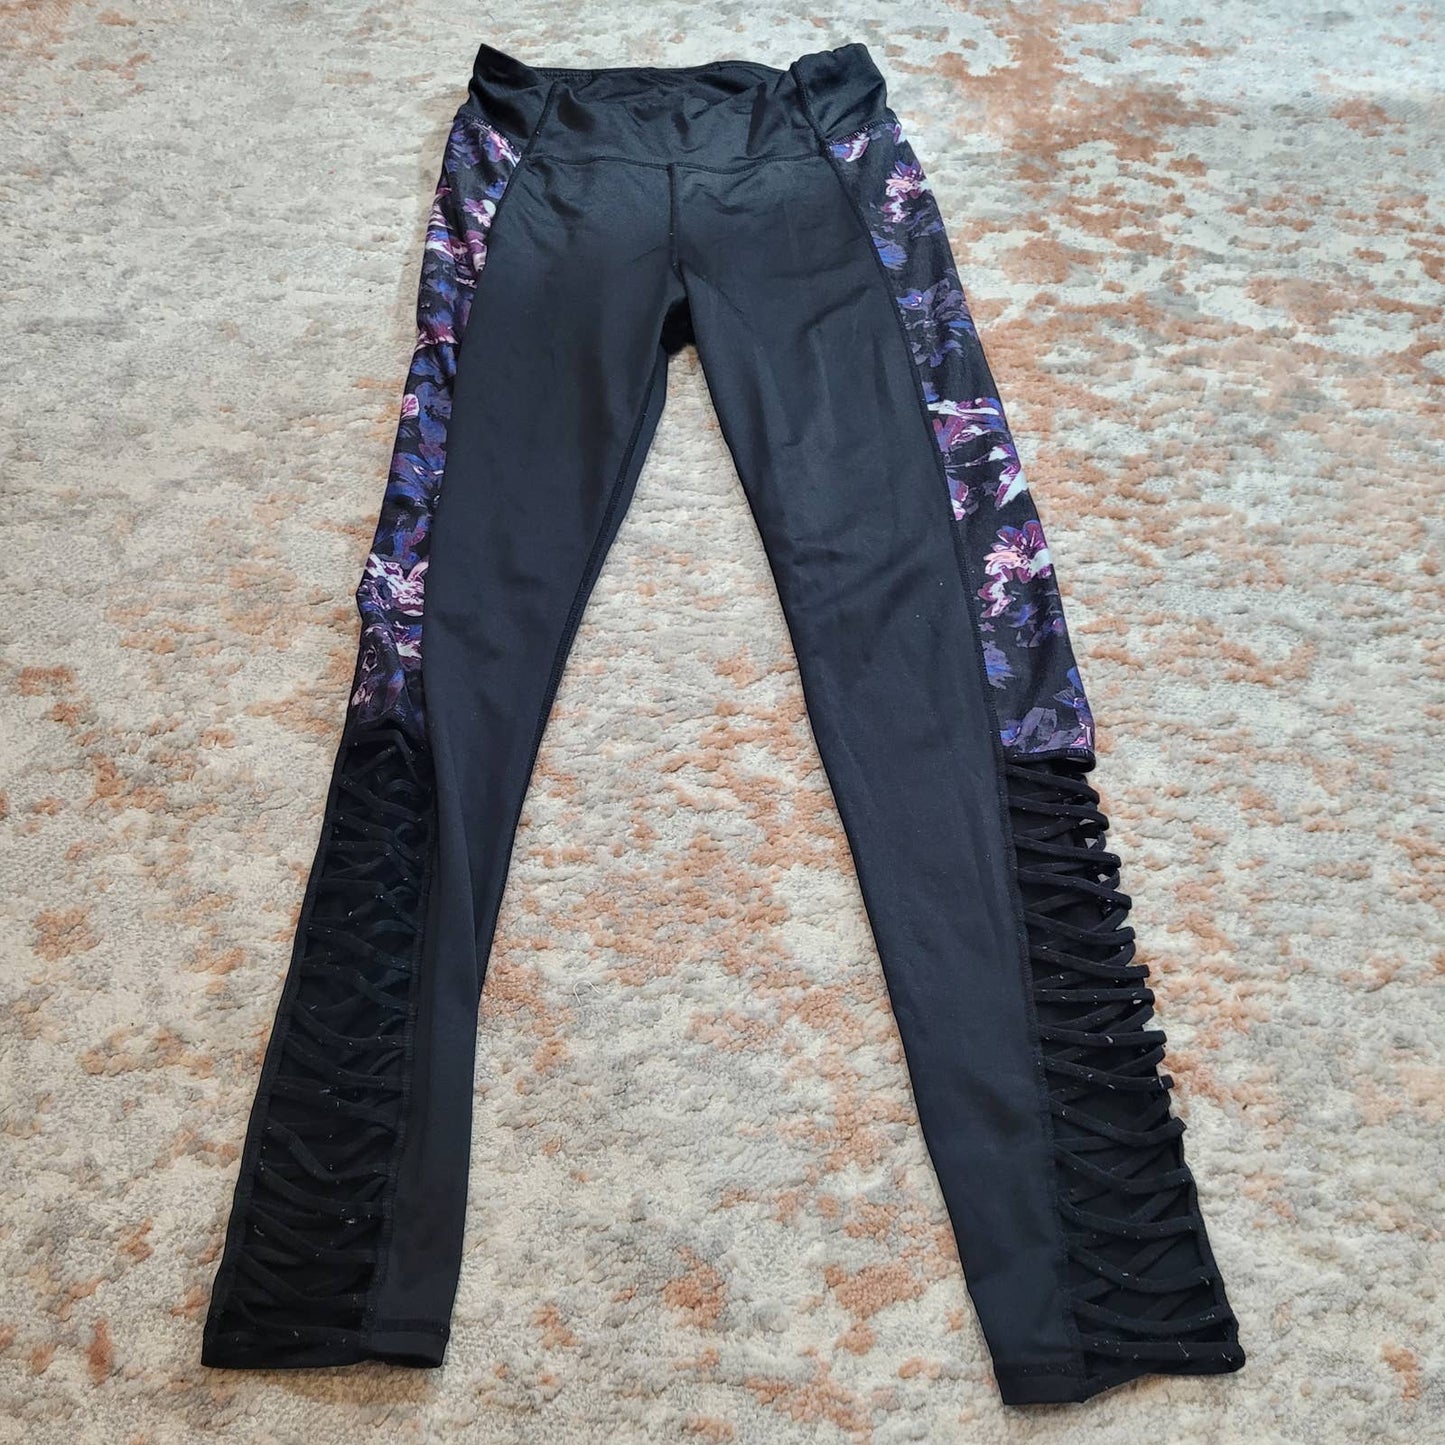 Black Leggings with Floral Side Panels and Strappy Calves - Size Medium